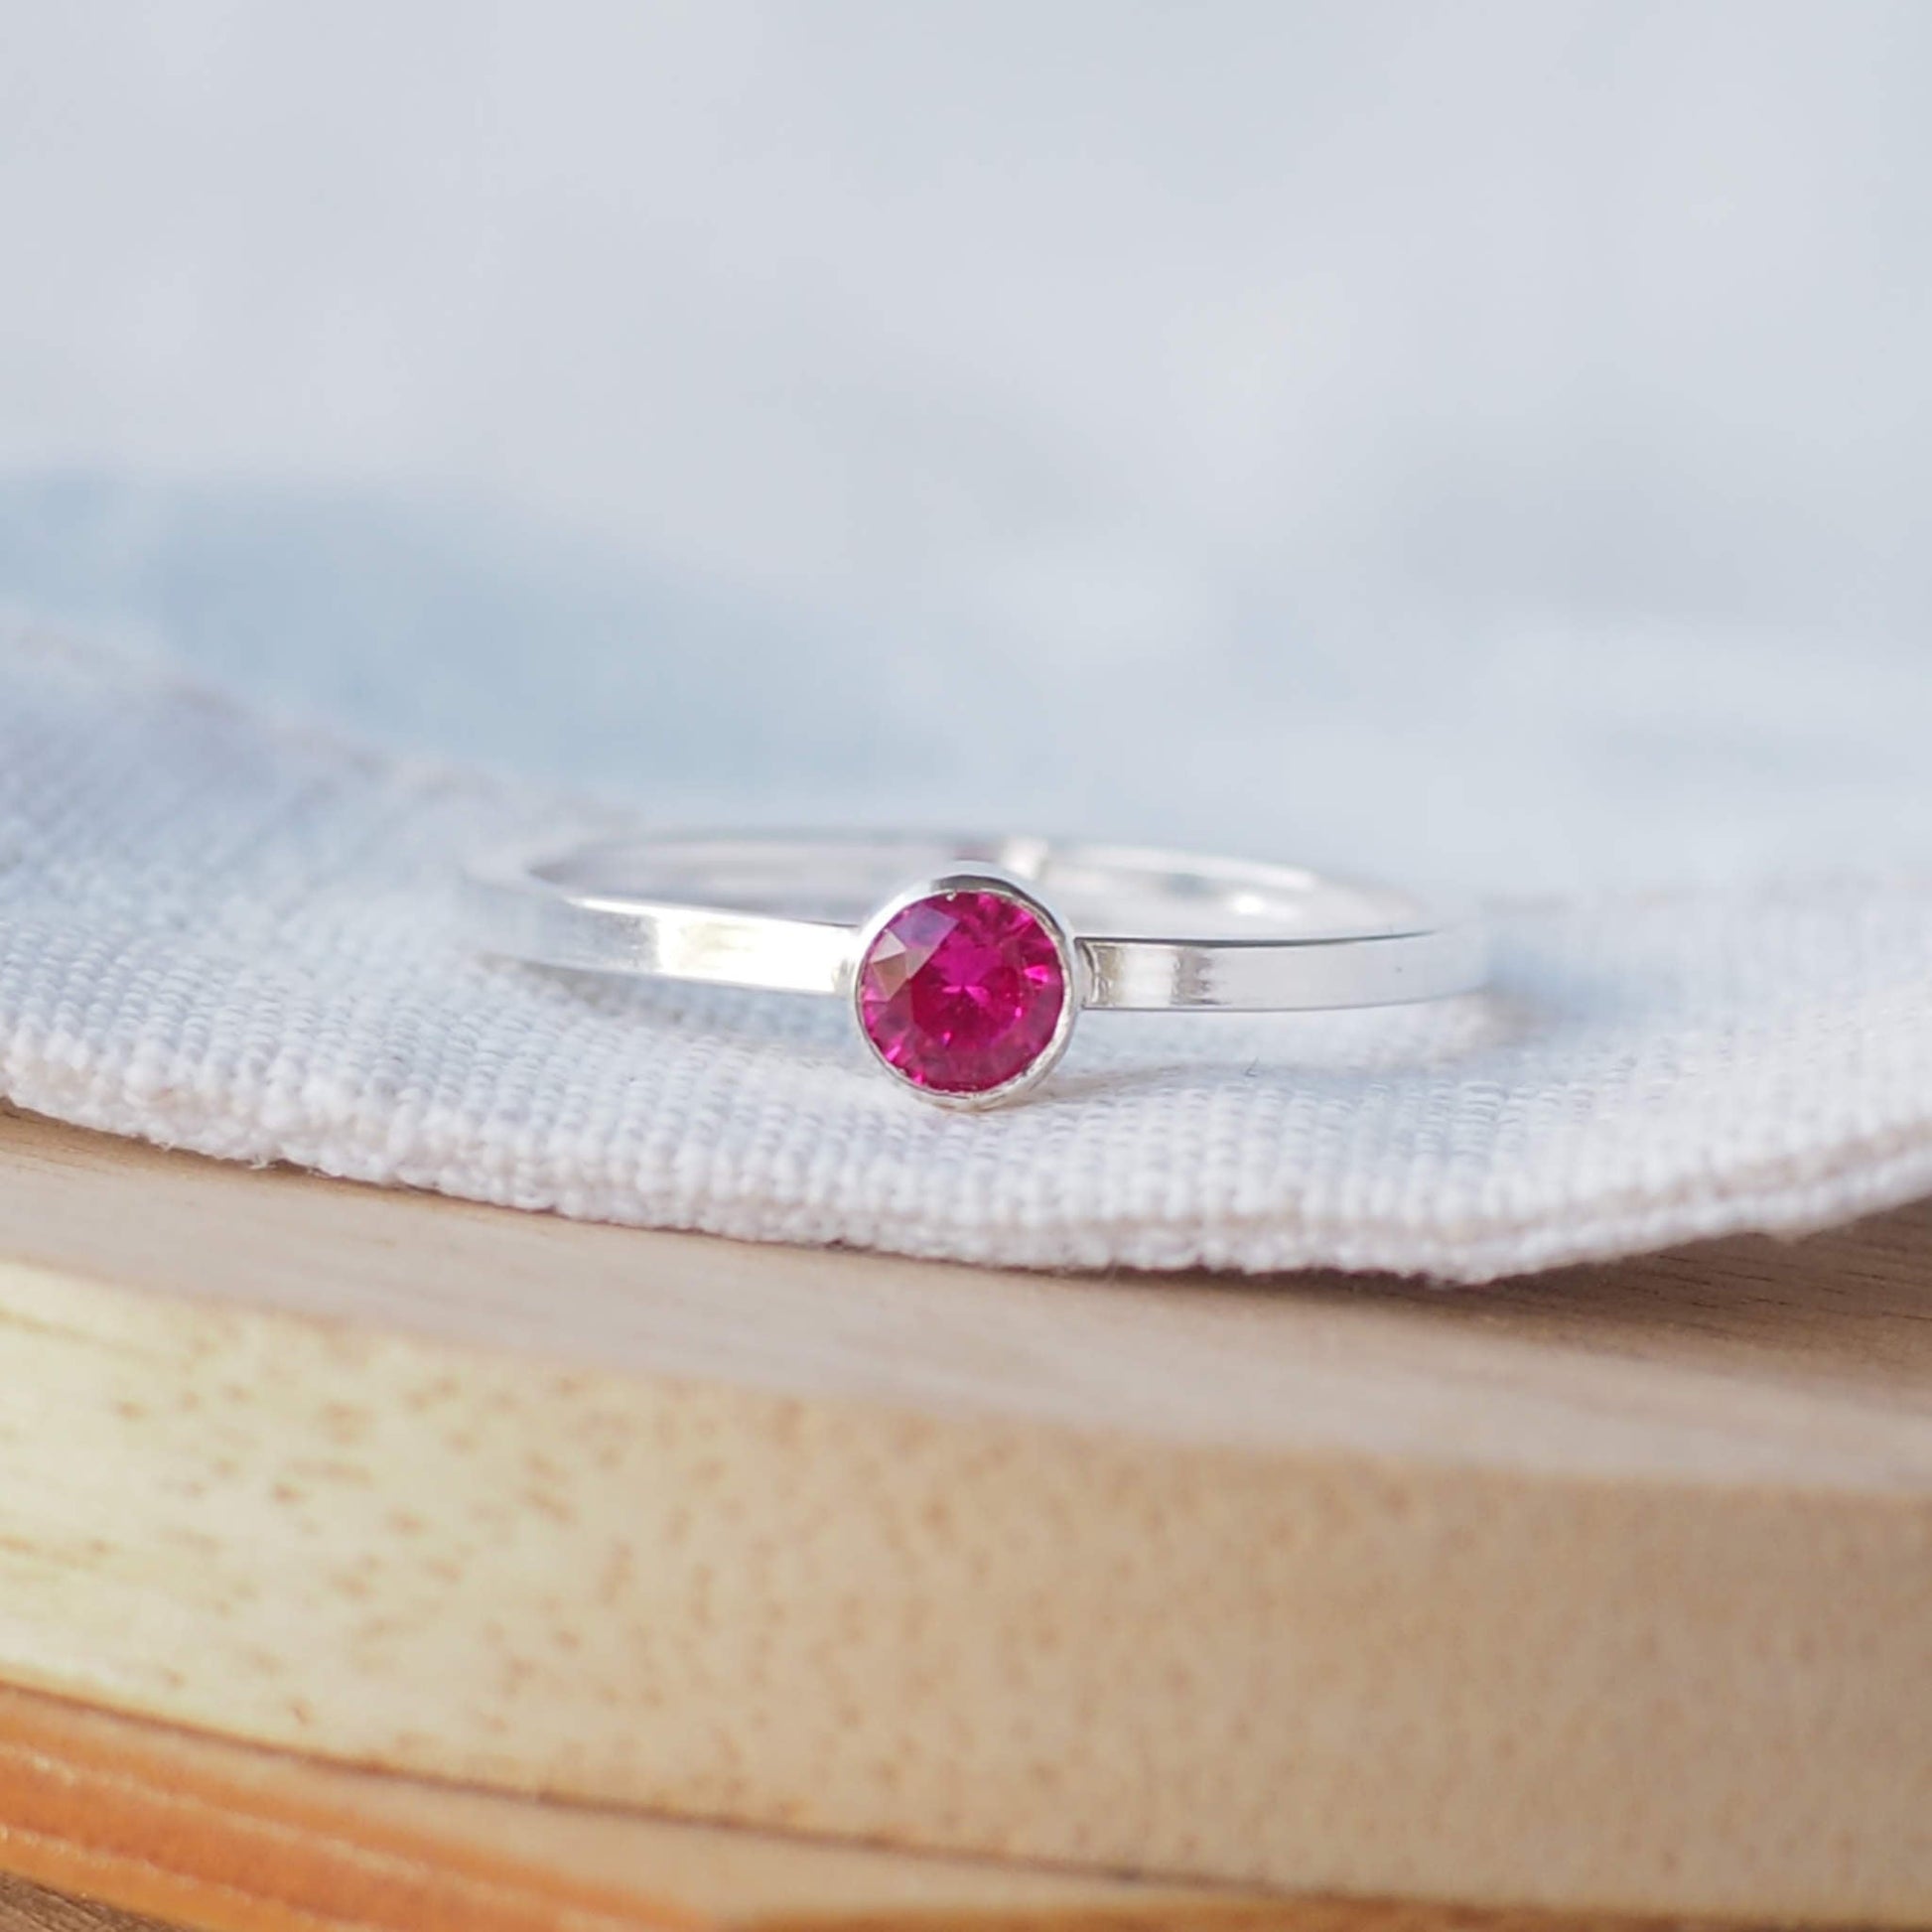 Silver ring with a pinky red gemstone. The ring is simple in style with no embellishment , with a round wire band 1.5mm thick with a simple ruby coloured 4mm round cubic zirconia stone set in an enclosed silver setting. Ruby is birthstone for July. The ring is Sterling Silver and made to your ring size. Handmade in Scotland by Maram Jewellery